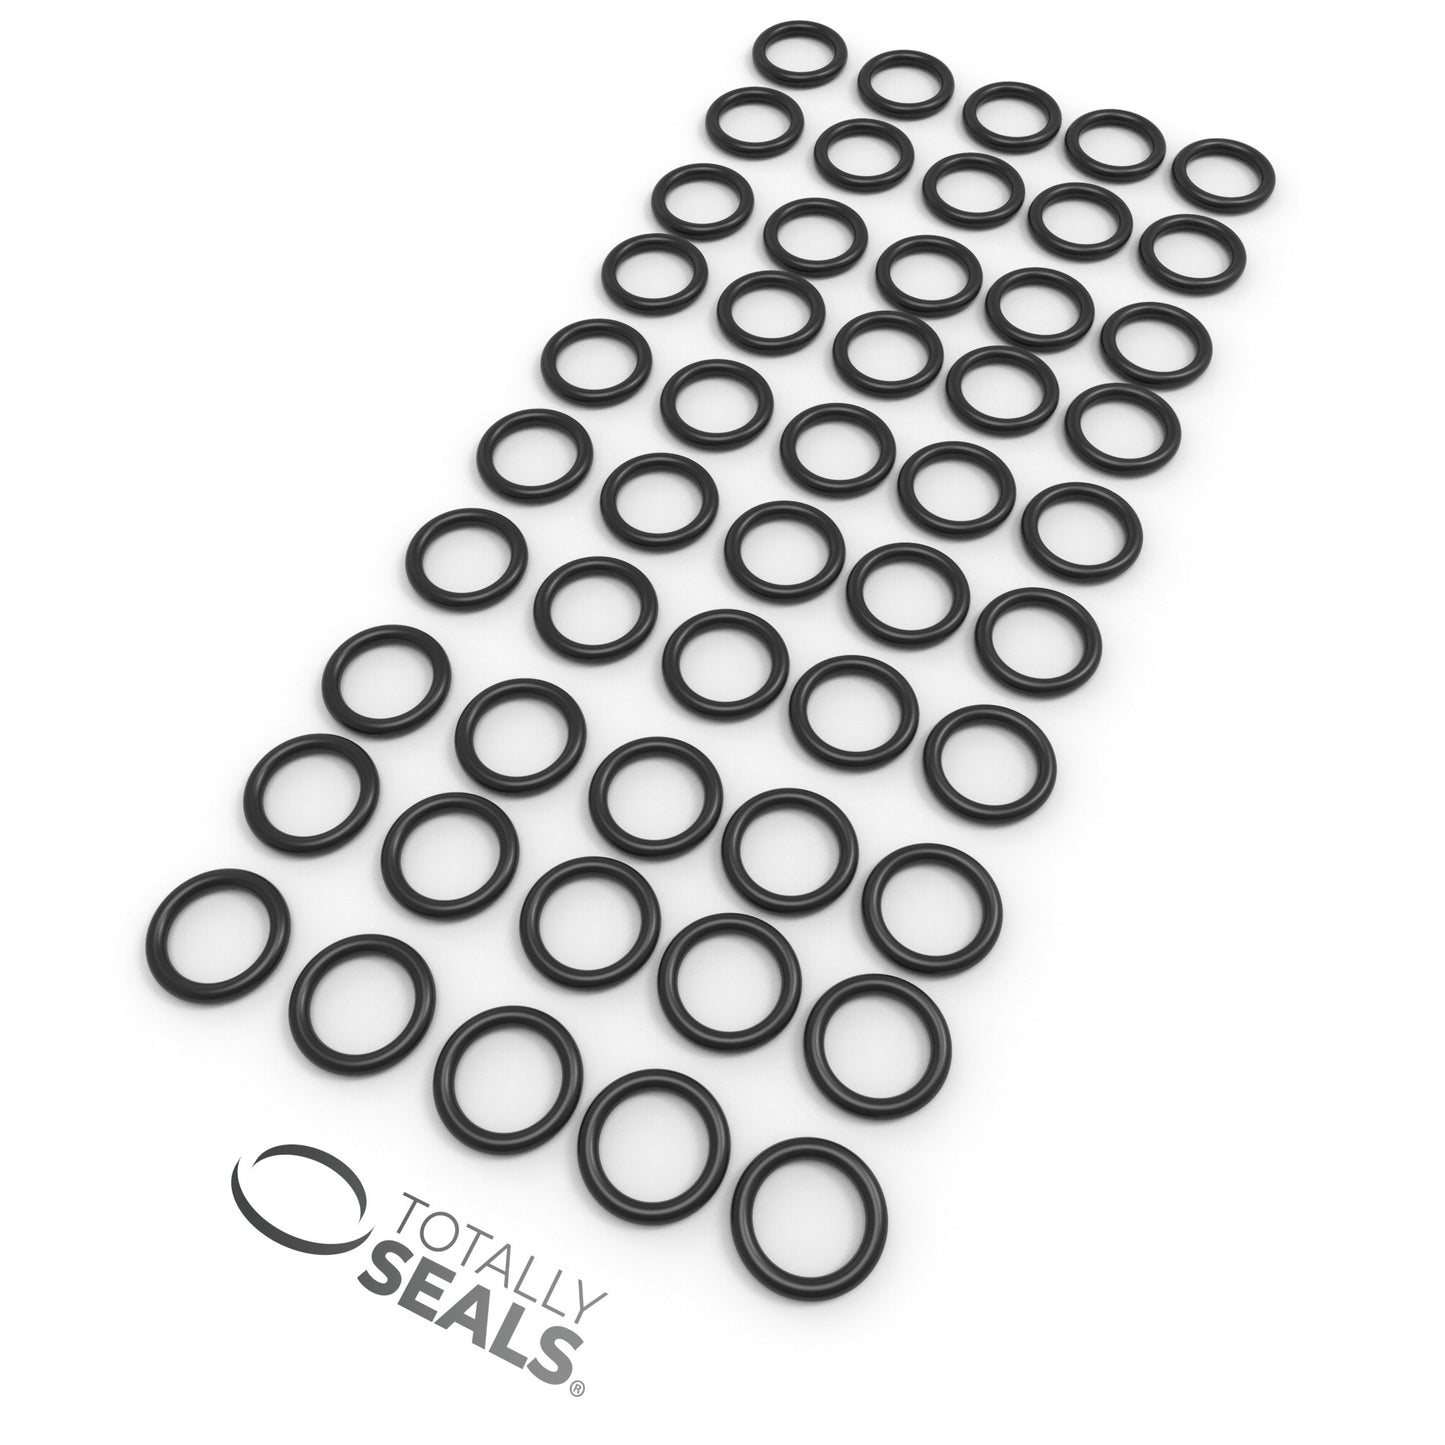 48mm x 3.5mm (55mm OD) Nitrile O-Rings - Totally Seals®